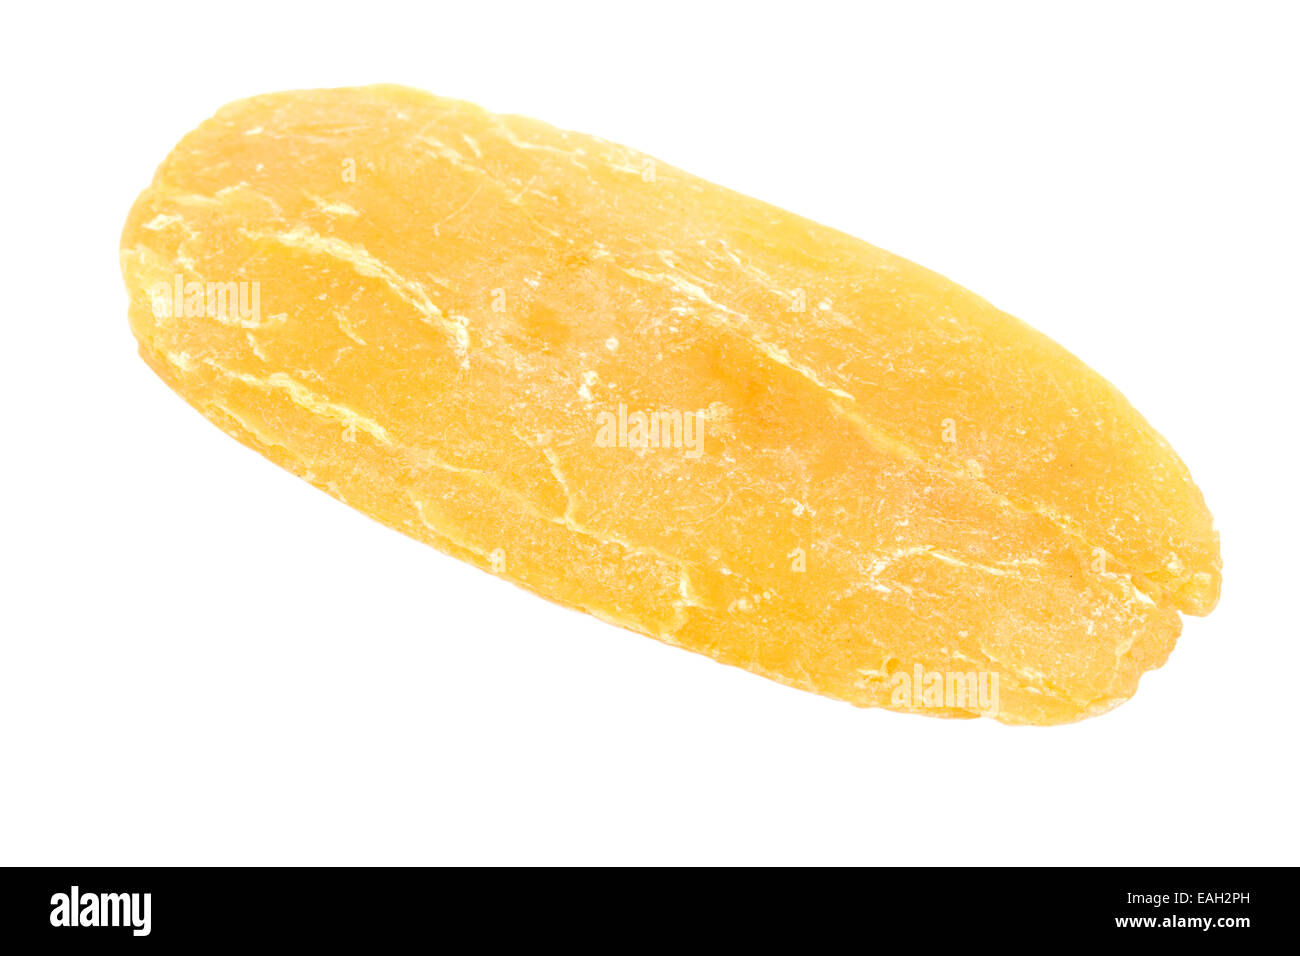 Savon naturel vieux scrap isolated on white with clipping path Banque D'Images